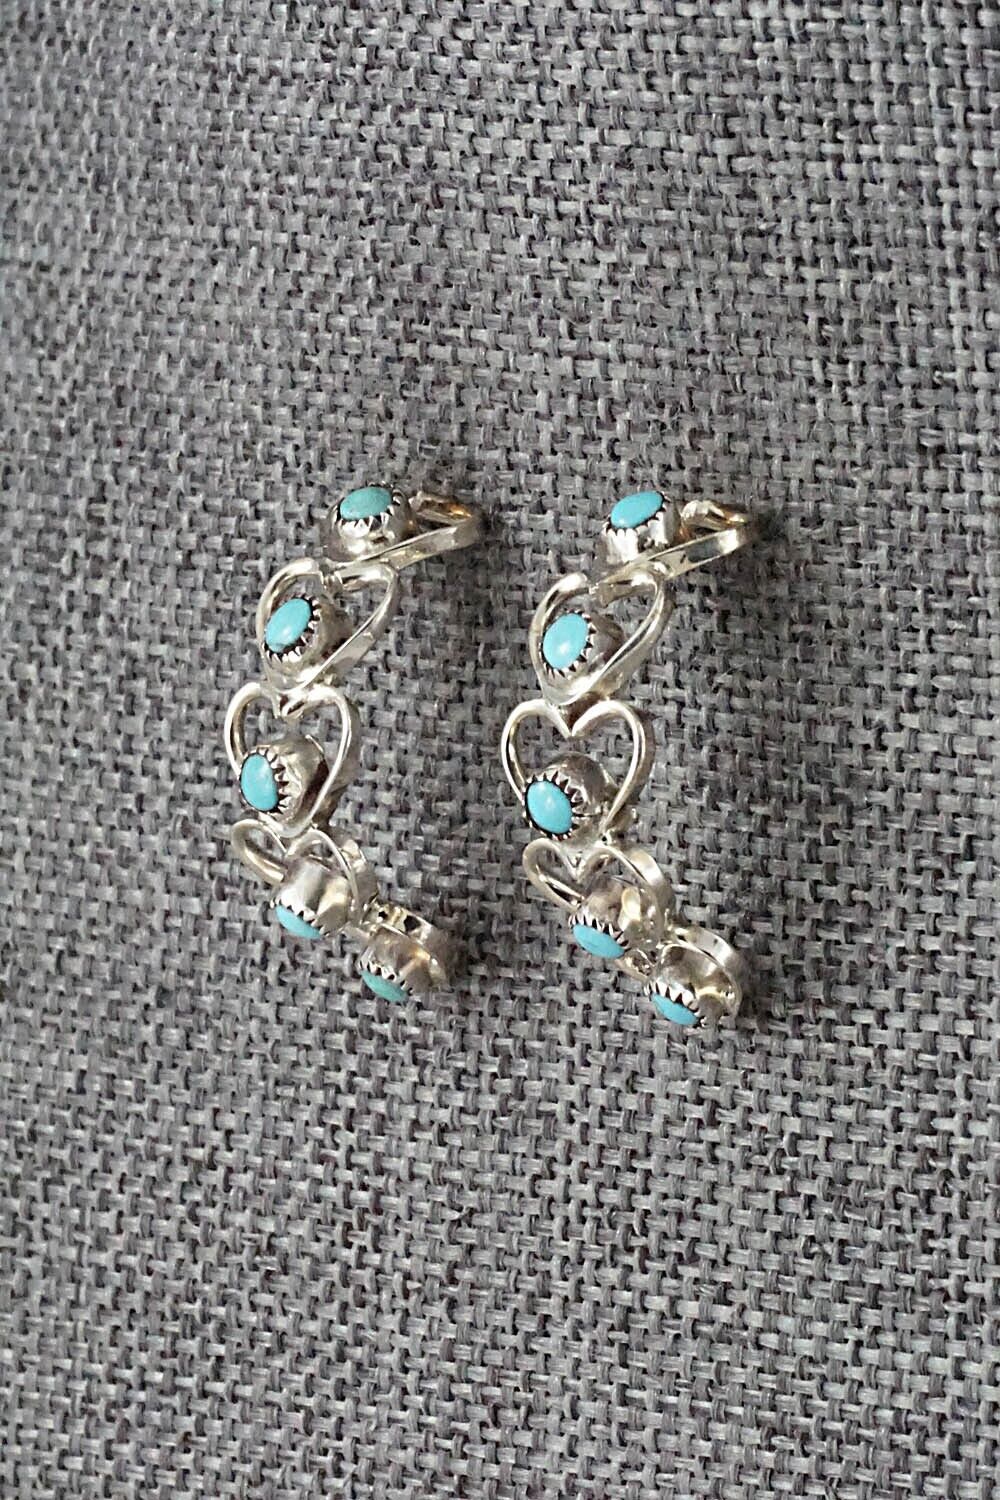 Turquoise & Sterling Silver Earrings - Hazel Pablito